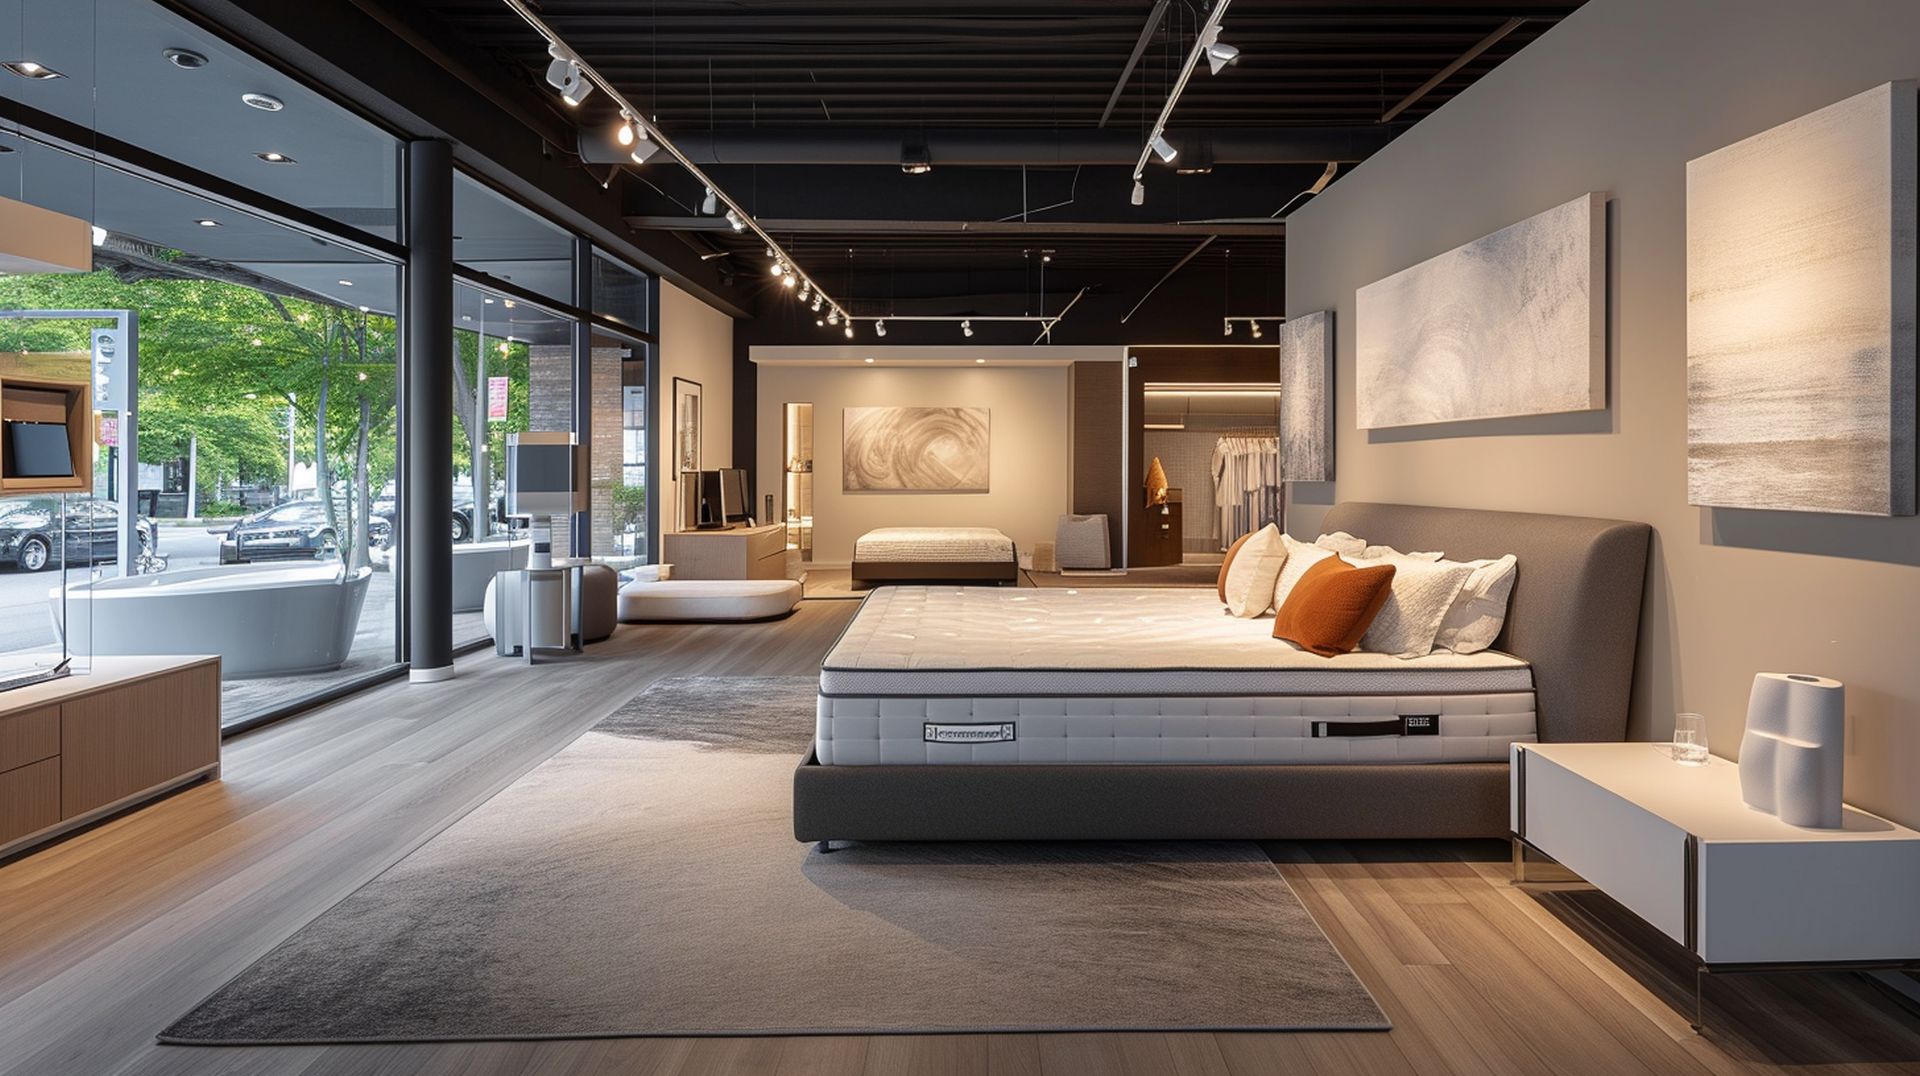 If you're looking for a new bed, mattress stores in Santa Maria offer the best customer and delivery service, financing, and warranties in California